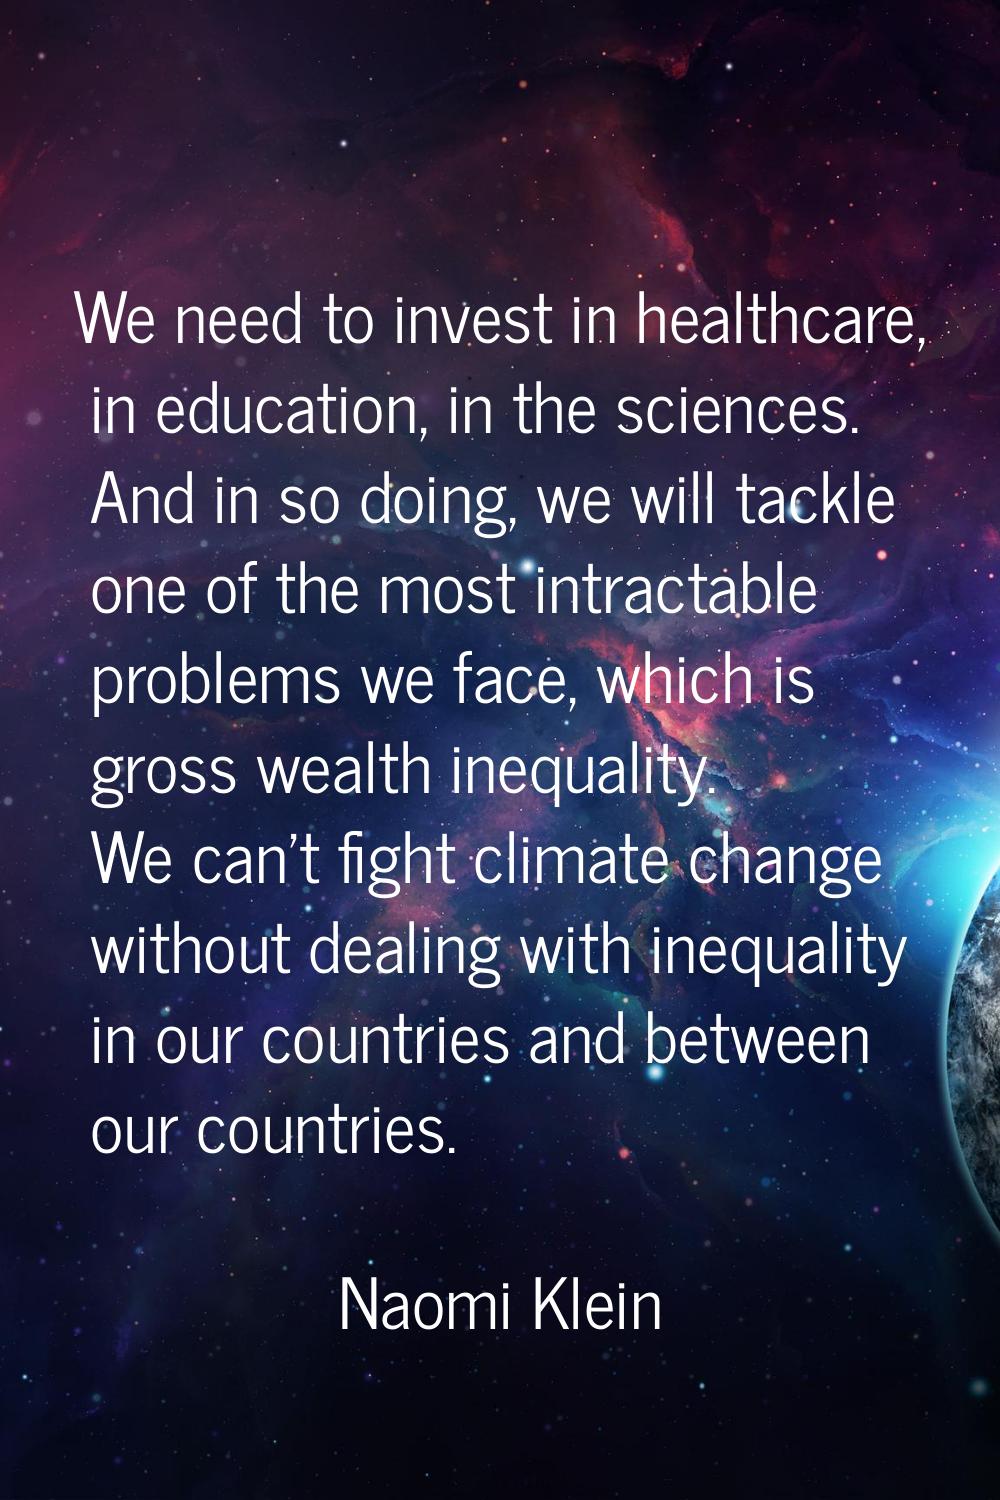 We need to invest in healthcare, in education, in the sciences. And in so doing, we will tackle one